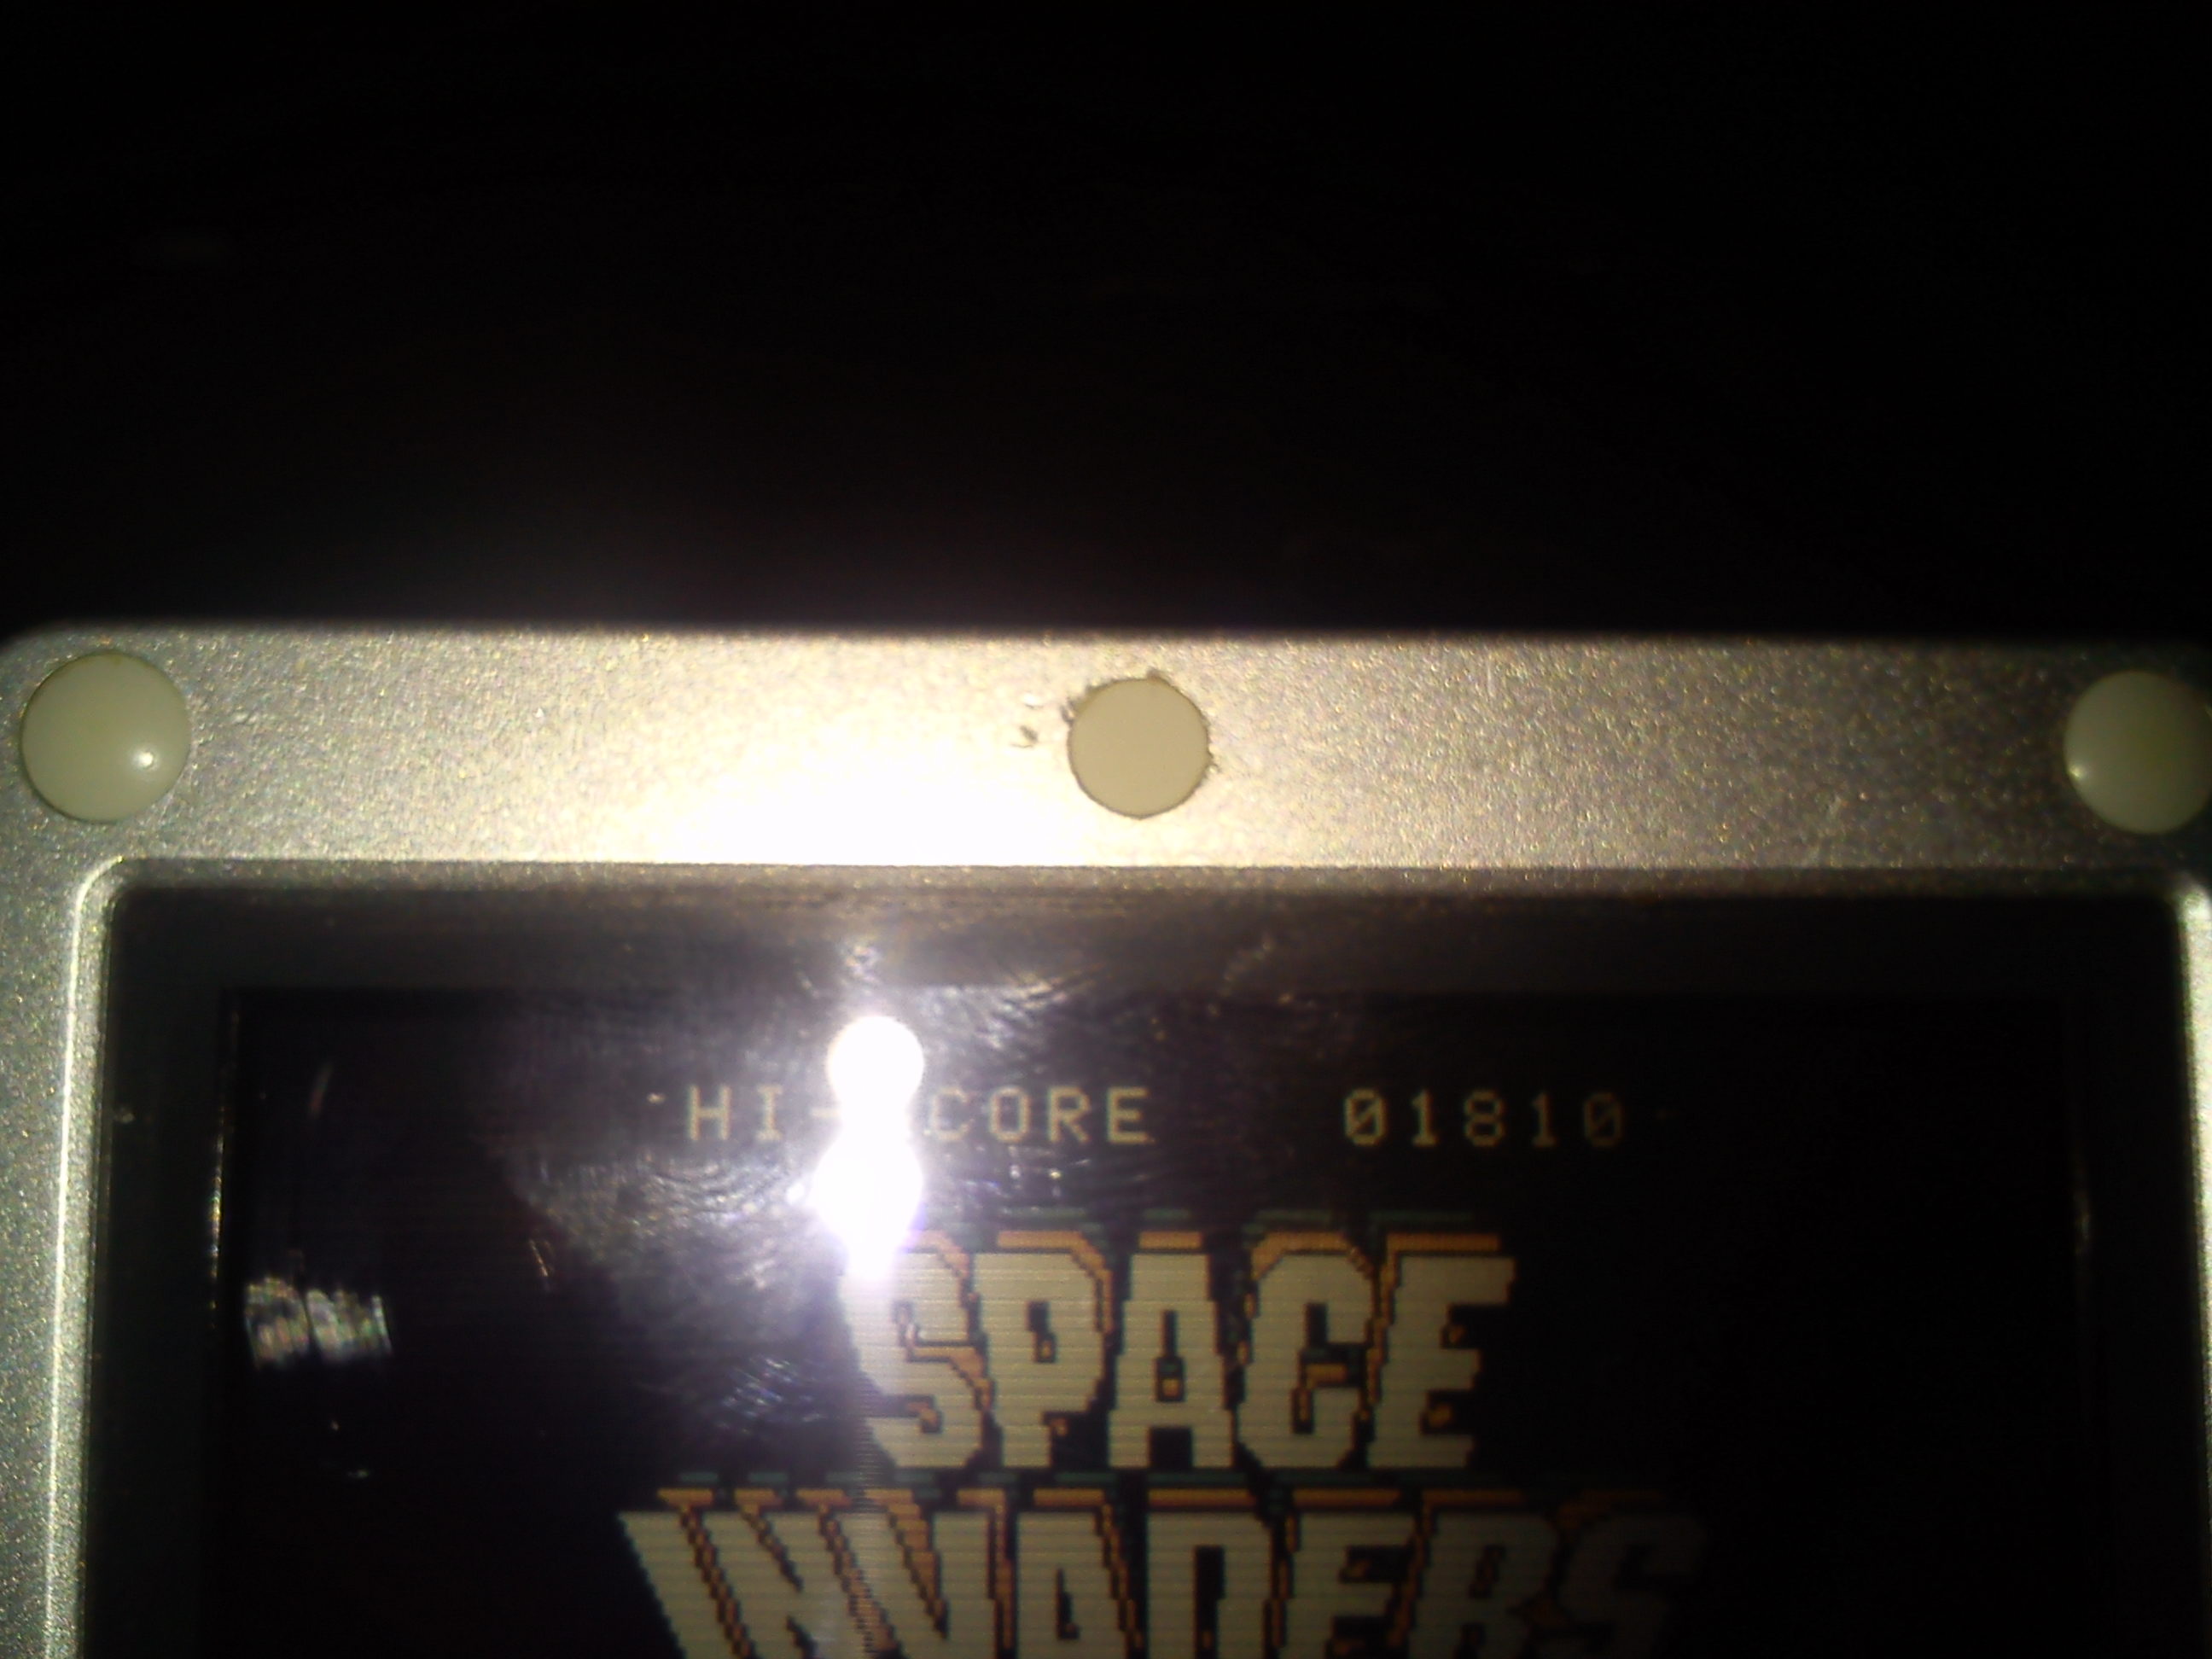 Space Invaders 1,810 points